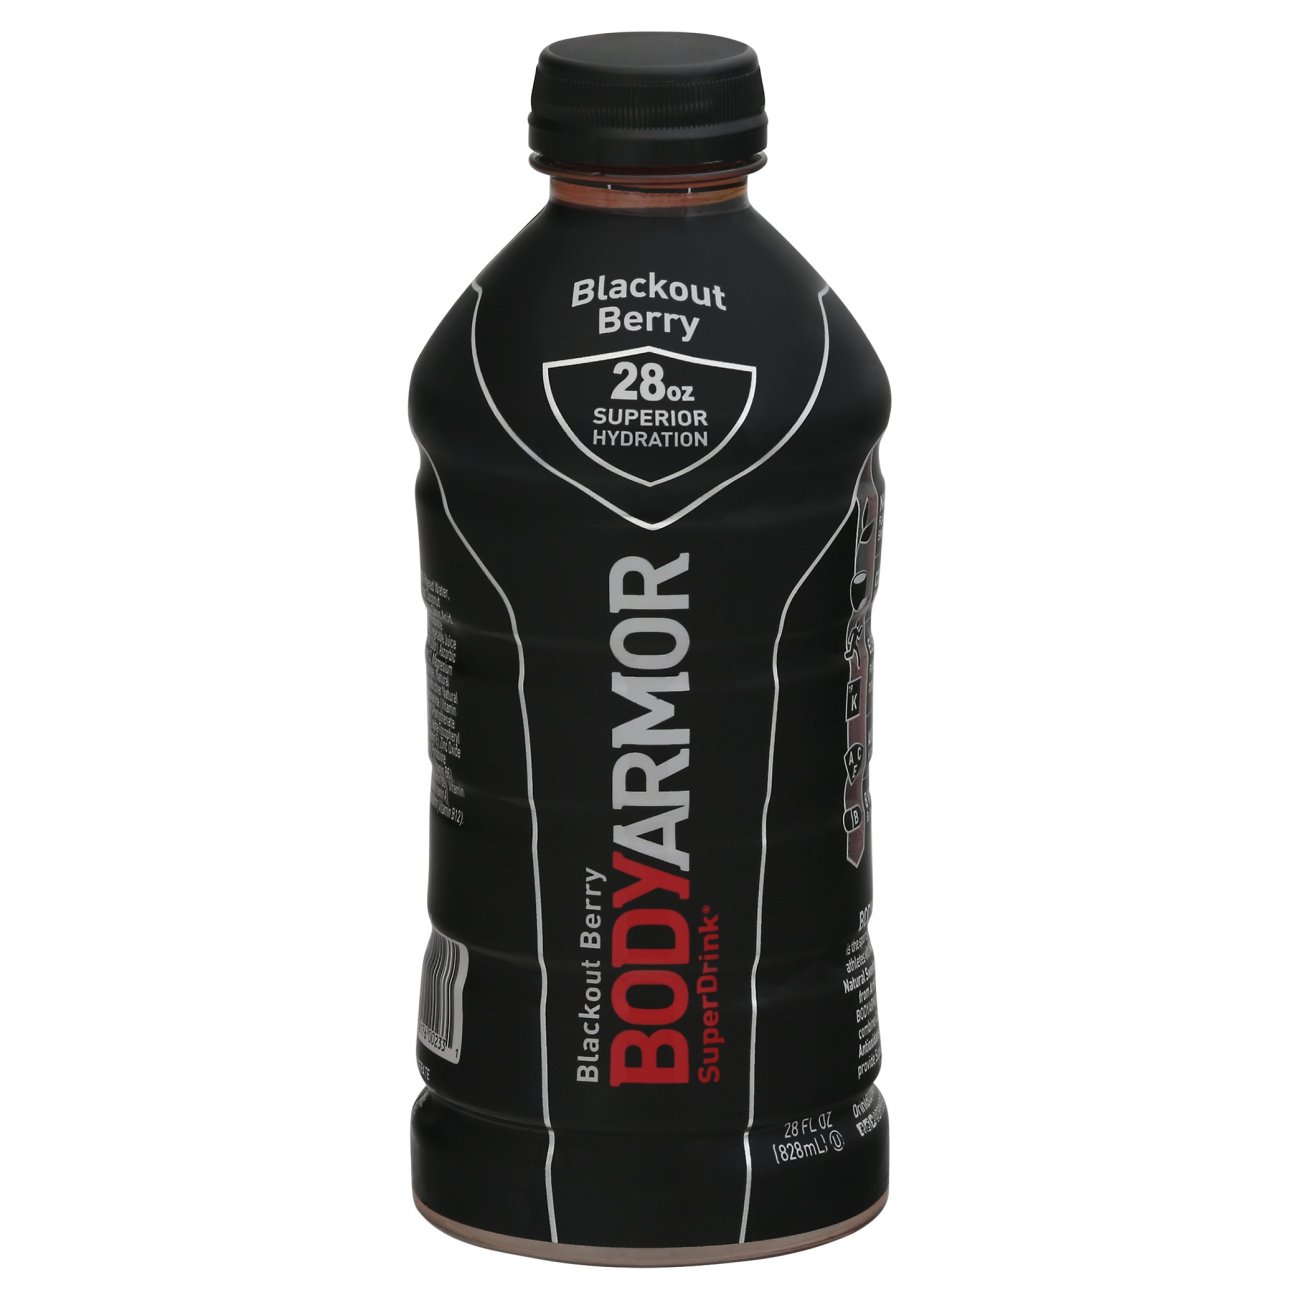 29 Minute Do you drink body armor before or after workout at Night